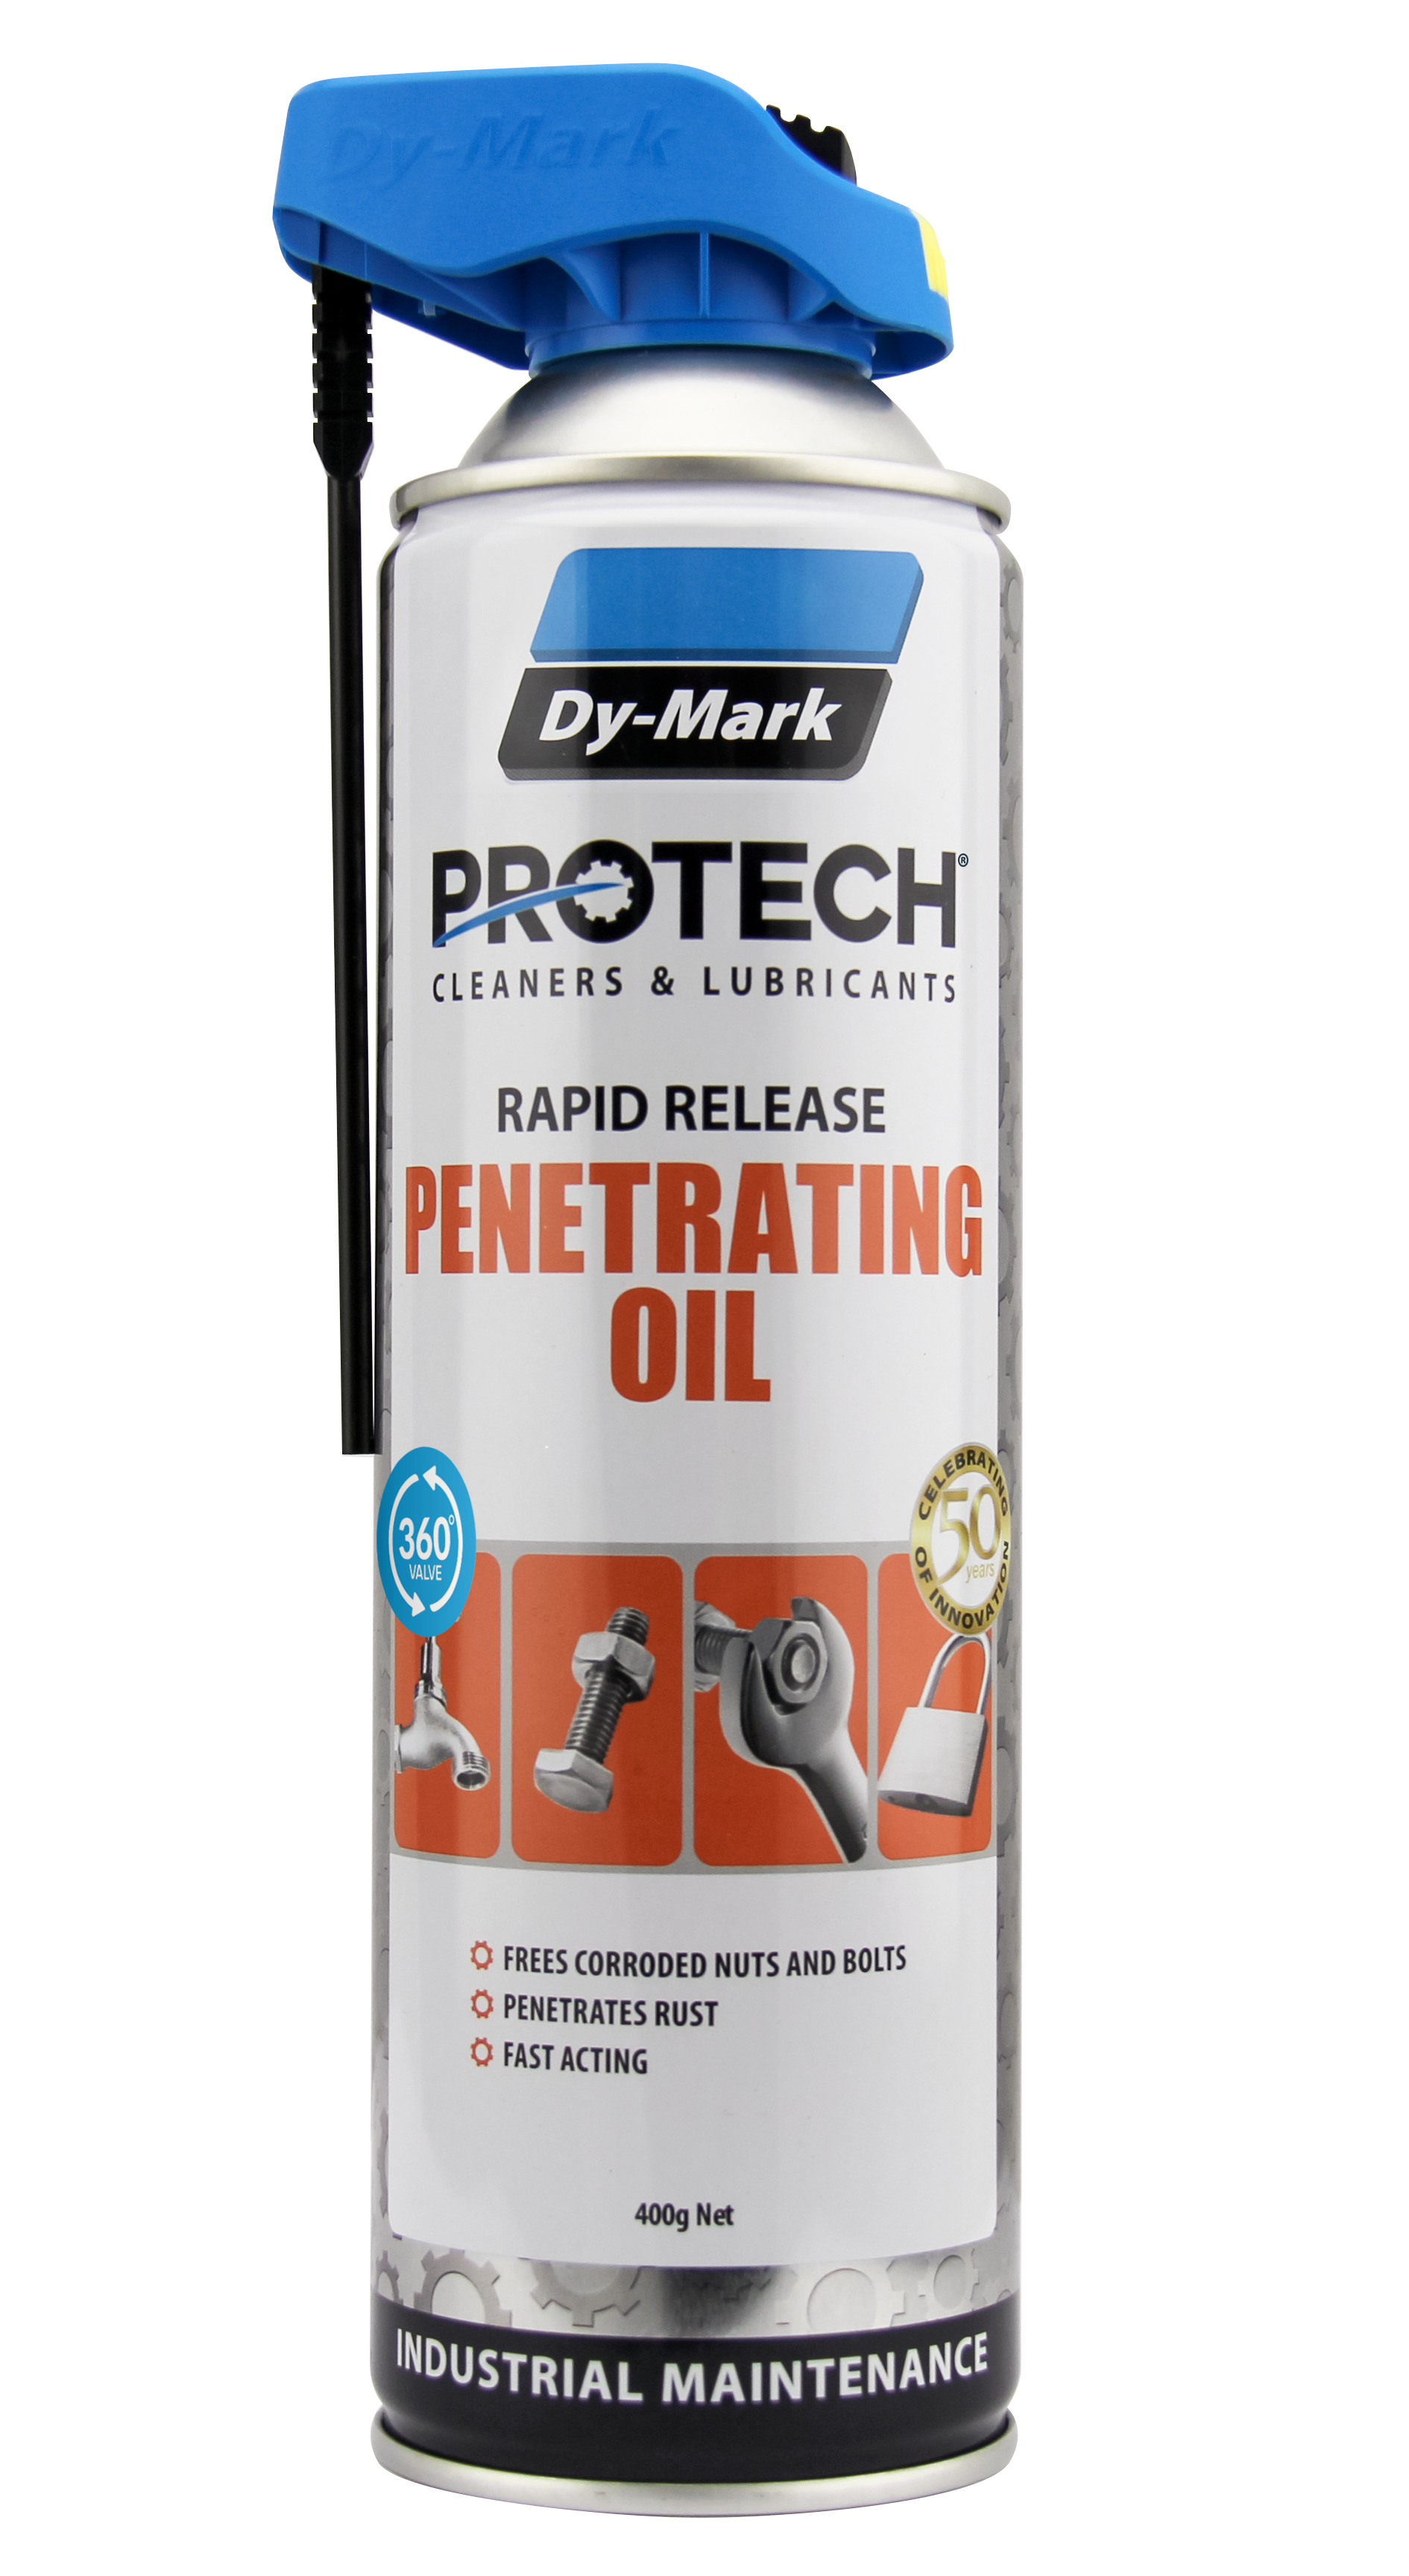 Dy-Mark Protech Penetrating Oil